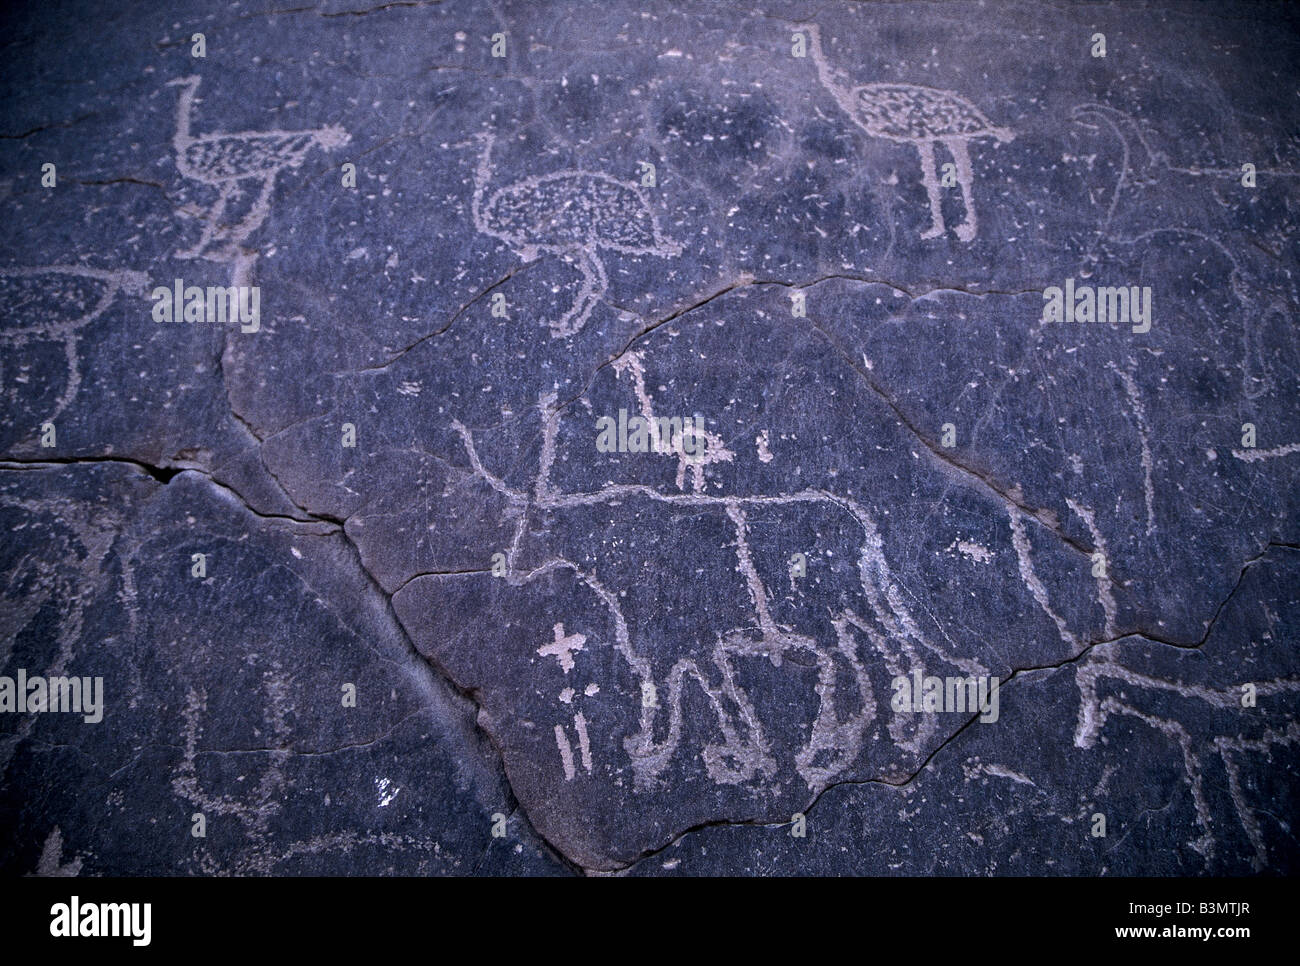 Petroglyphs or rock carvings depict animals at a time when the Sahara Desert was green, Libya. Stock Photo